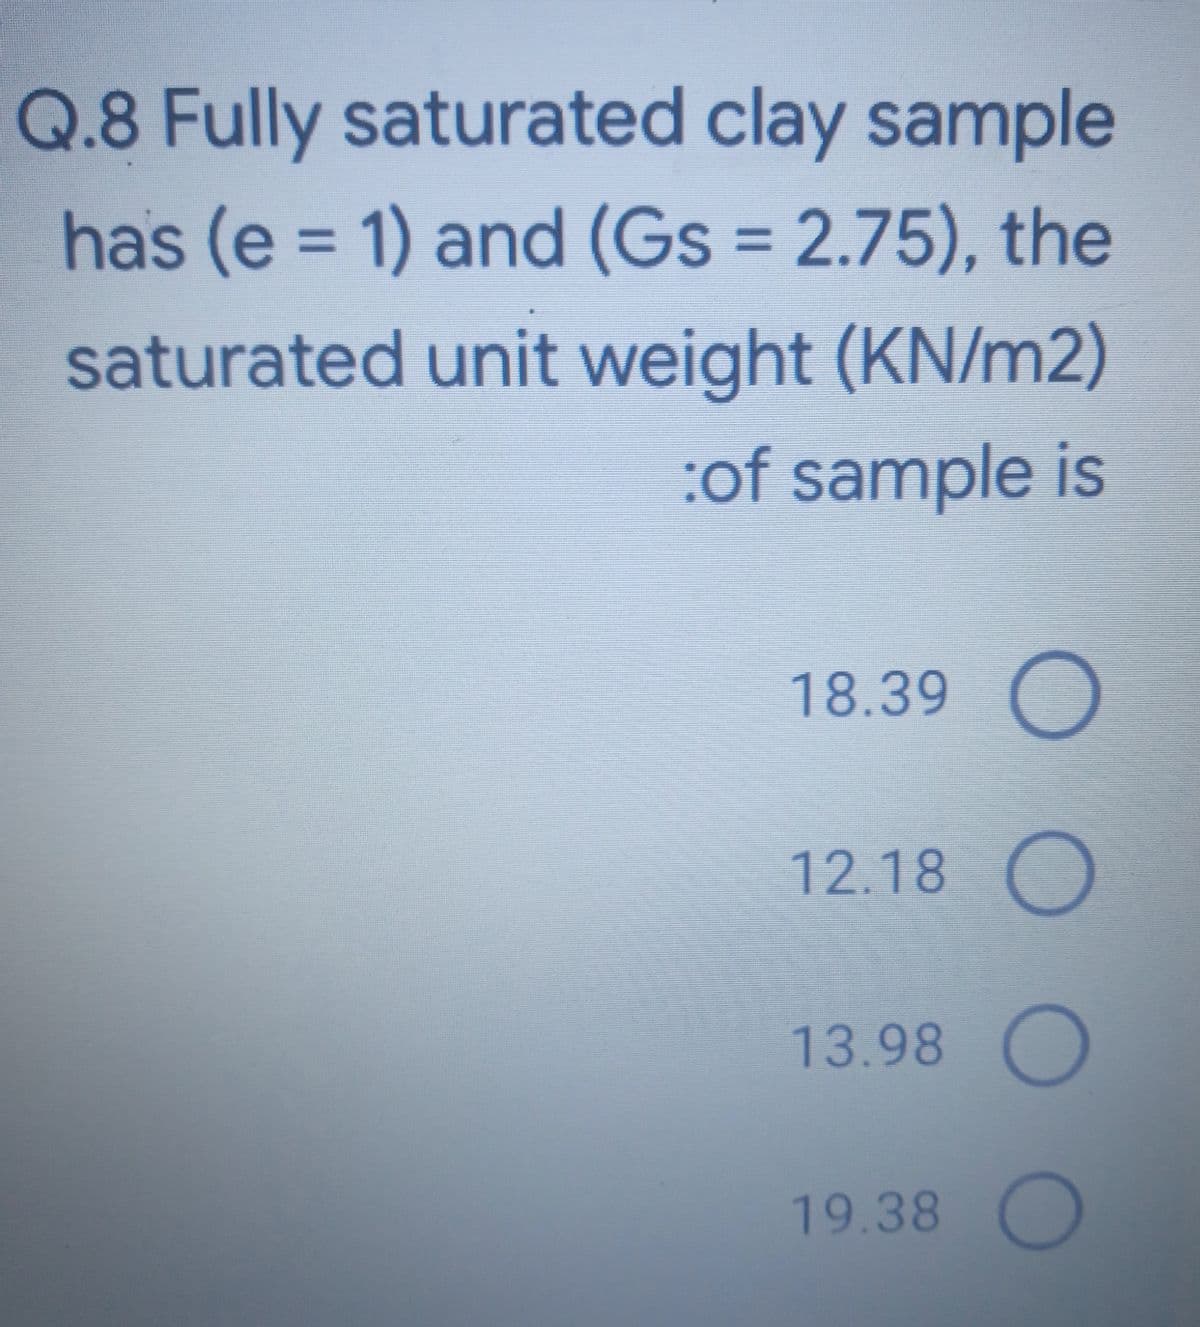 Q.8 Fully saturated clay sample
has (e = 1) and (Gs = 2.75), the
%3D
%3D
saturated unit weight (KN/m2)
:of sample is
18.39 O
12.18
13.98
19.38 O
